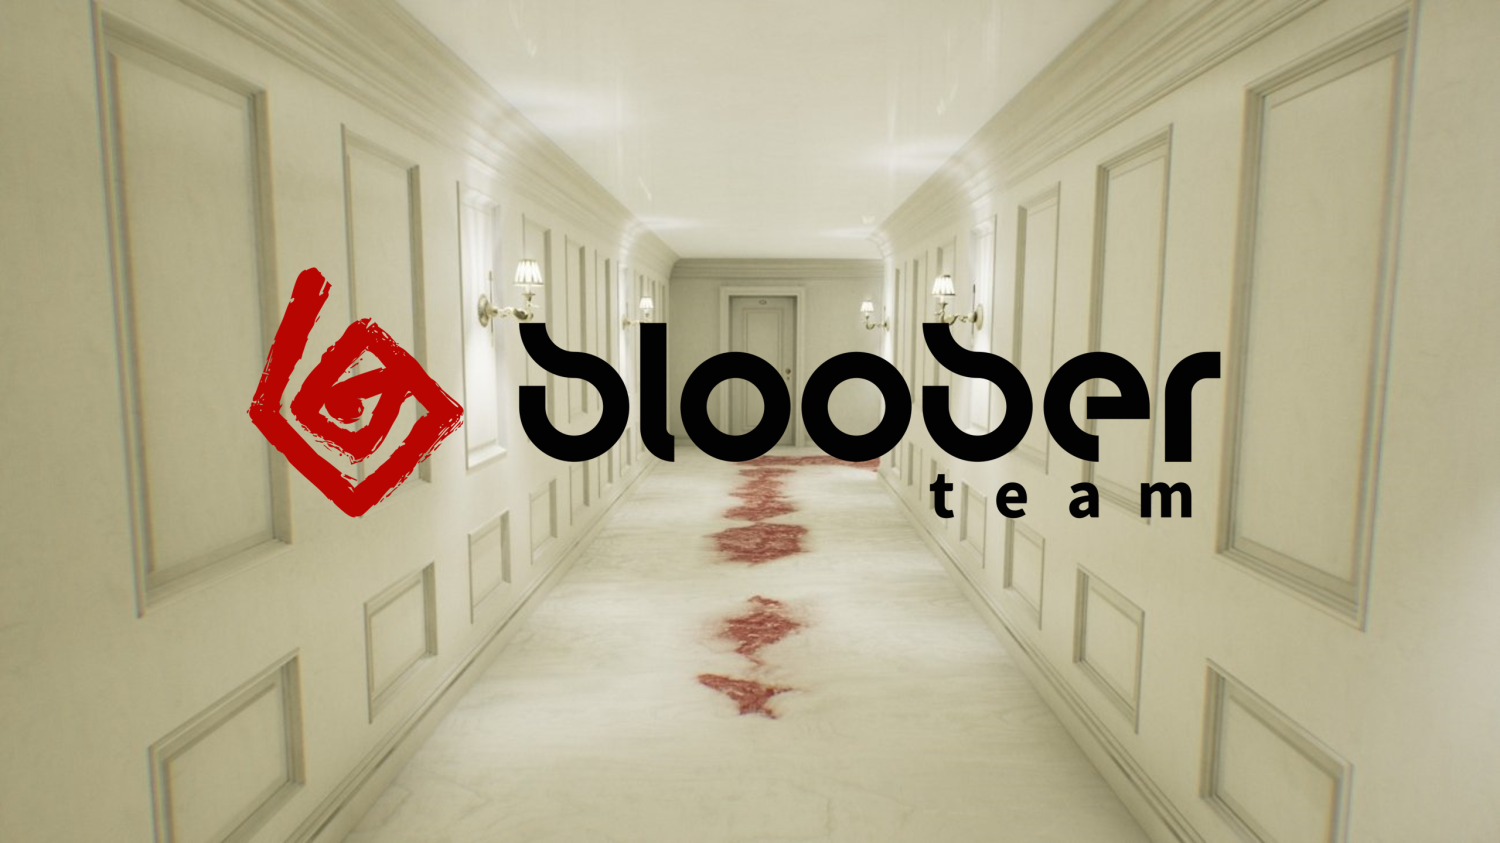 Sony to distribute Bloober's new games, possibly includes Silent Hill